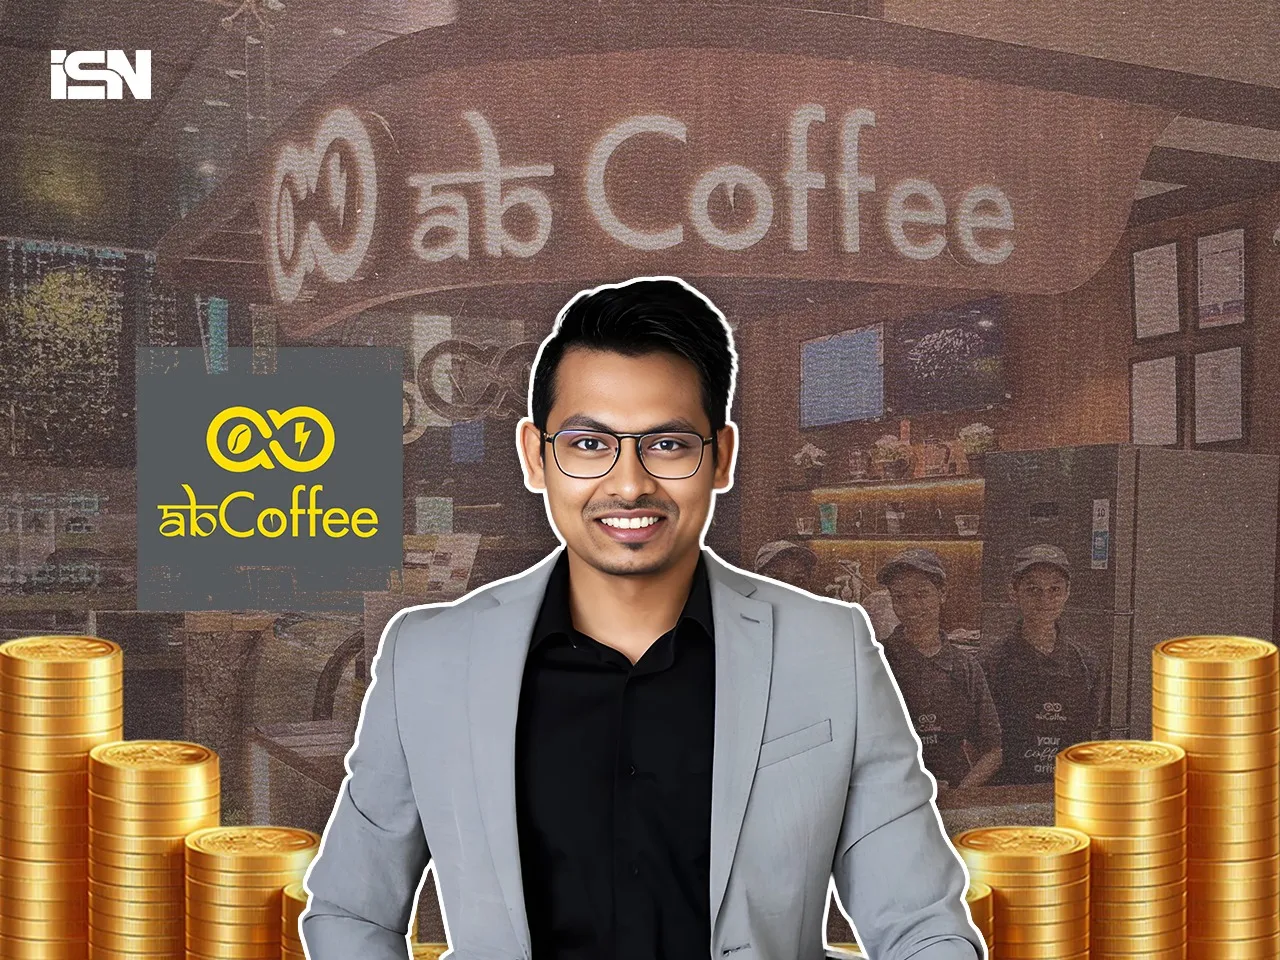 abcoffee founder Abhijeet Anand